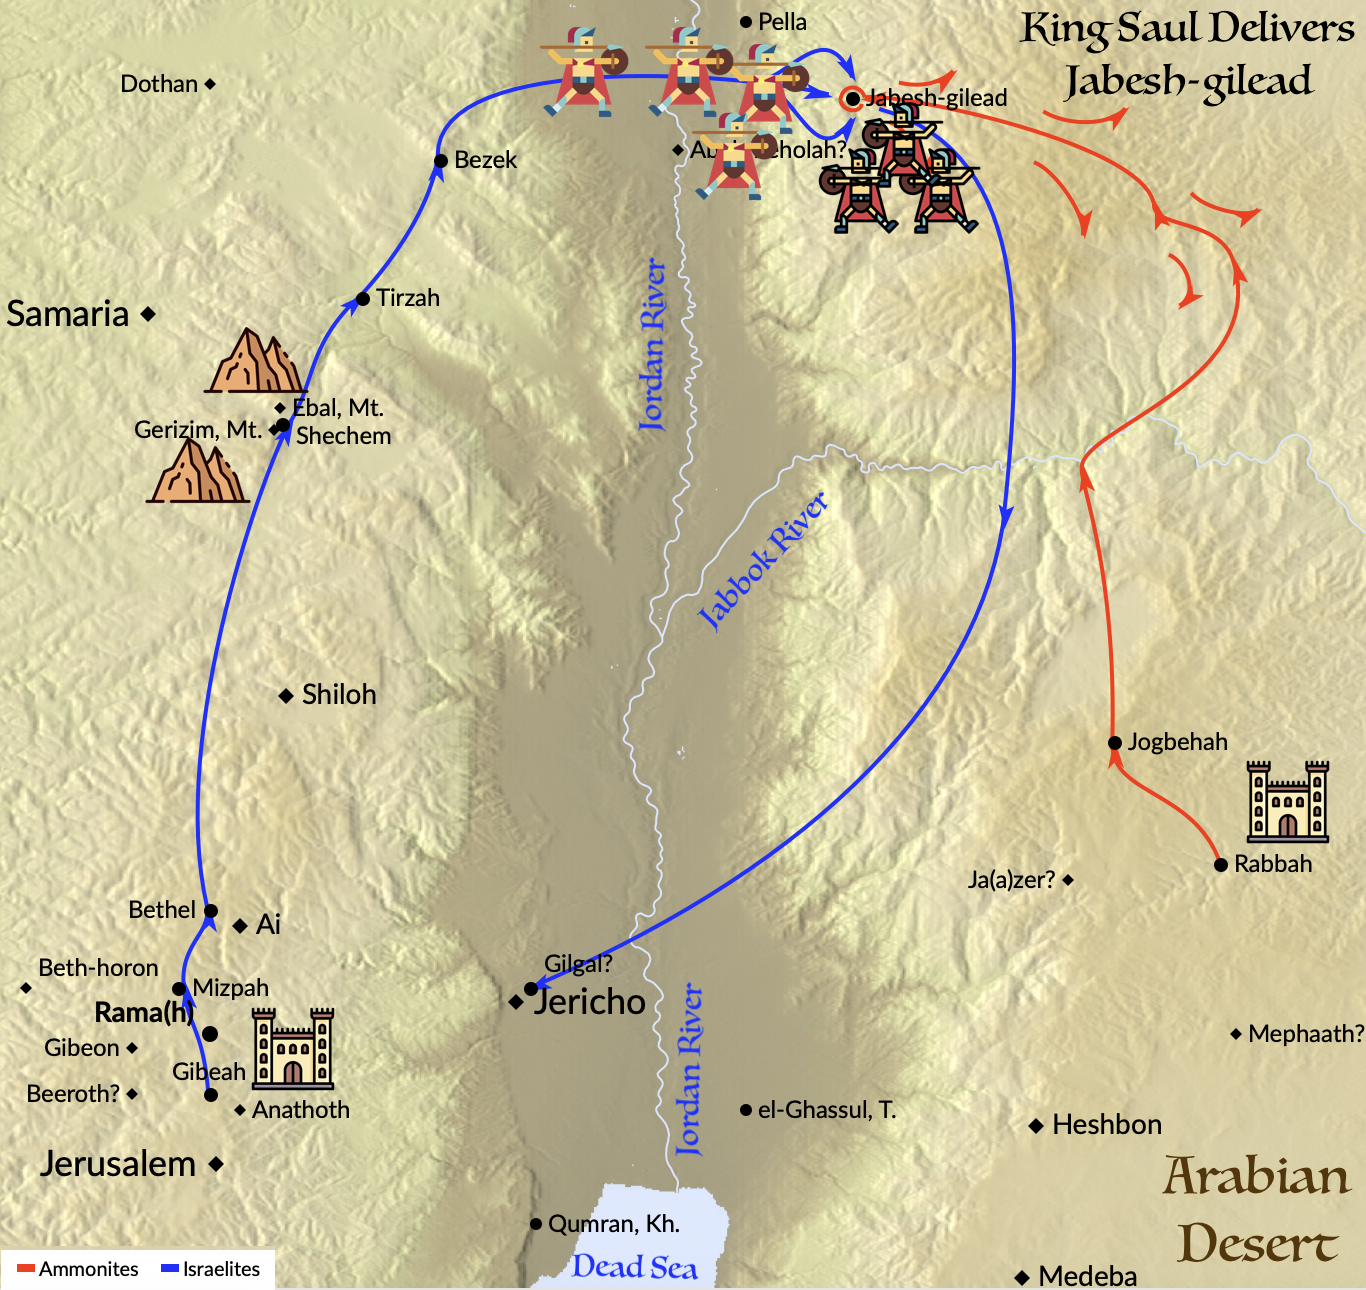 King Saul delivers the city of Jabesh-gilead from the Ammonites.